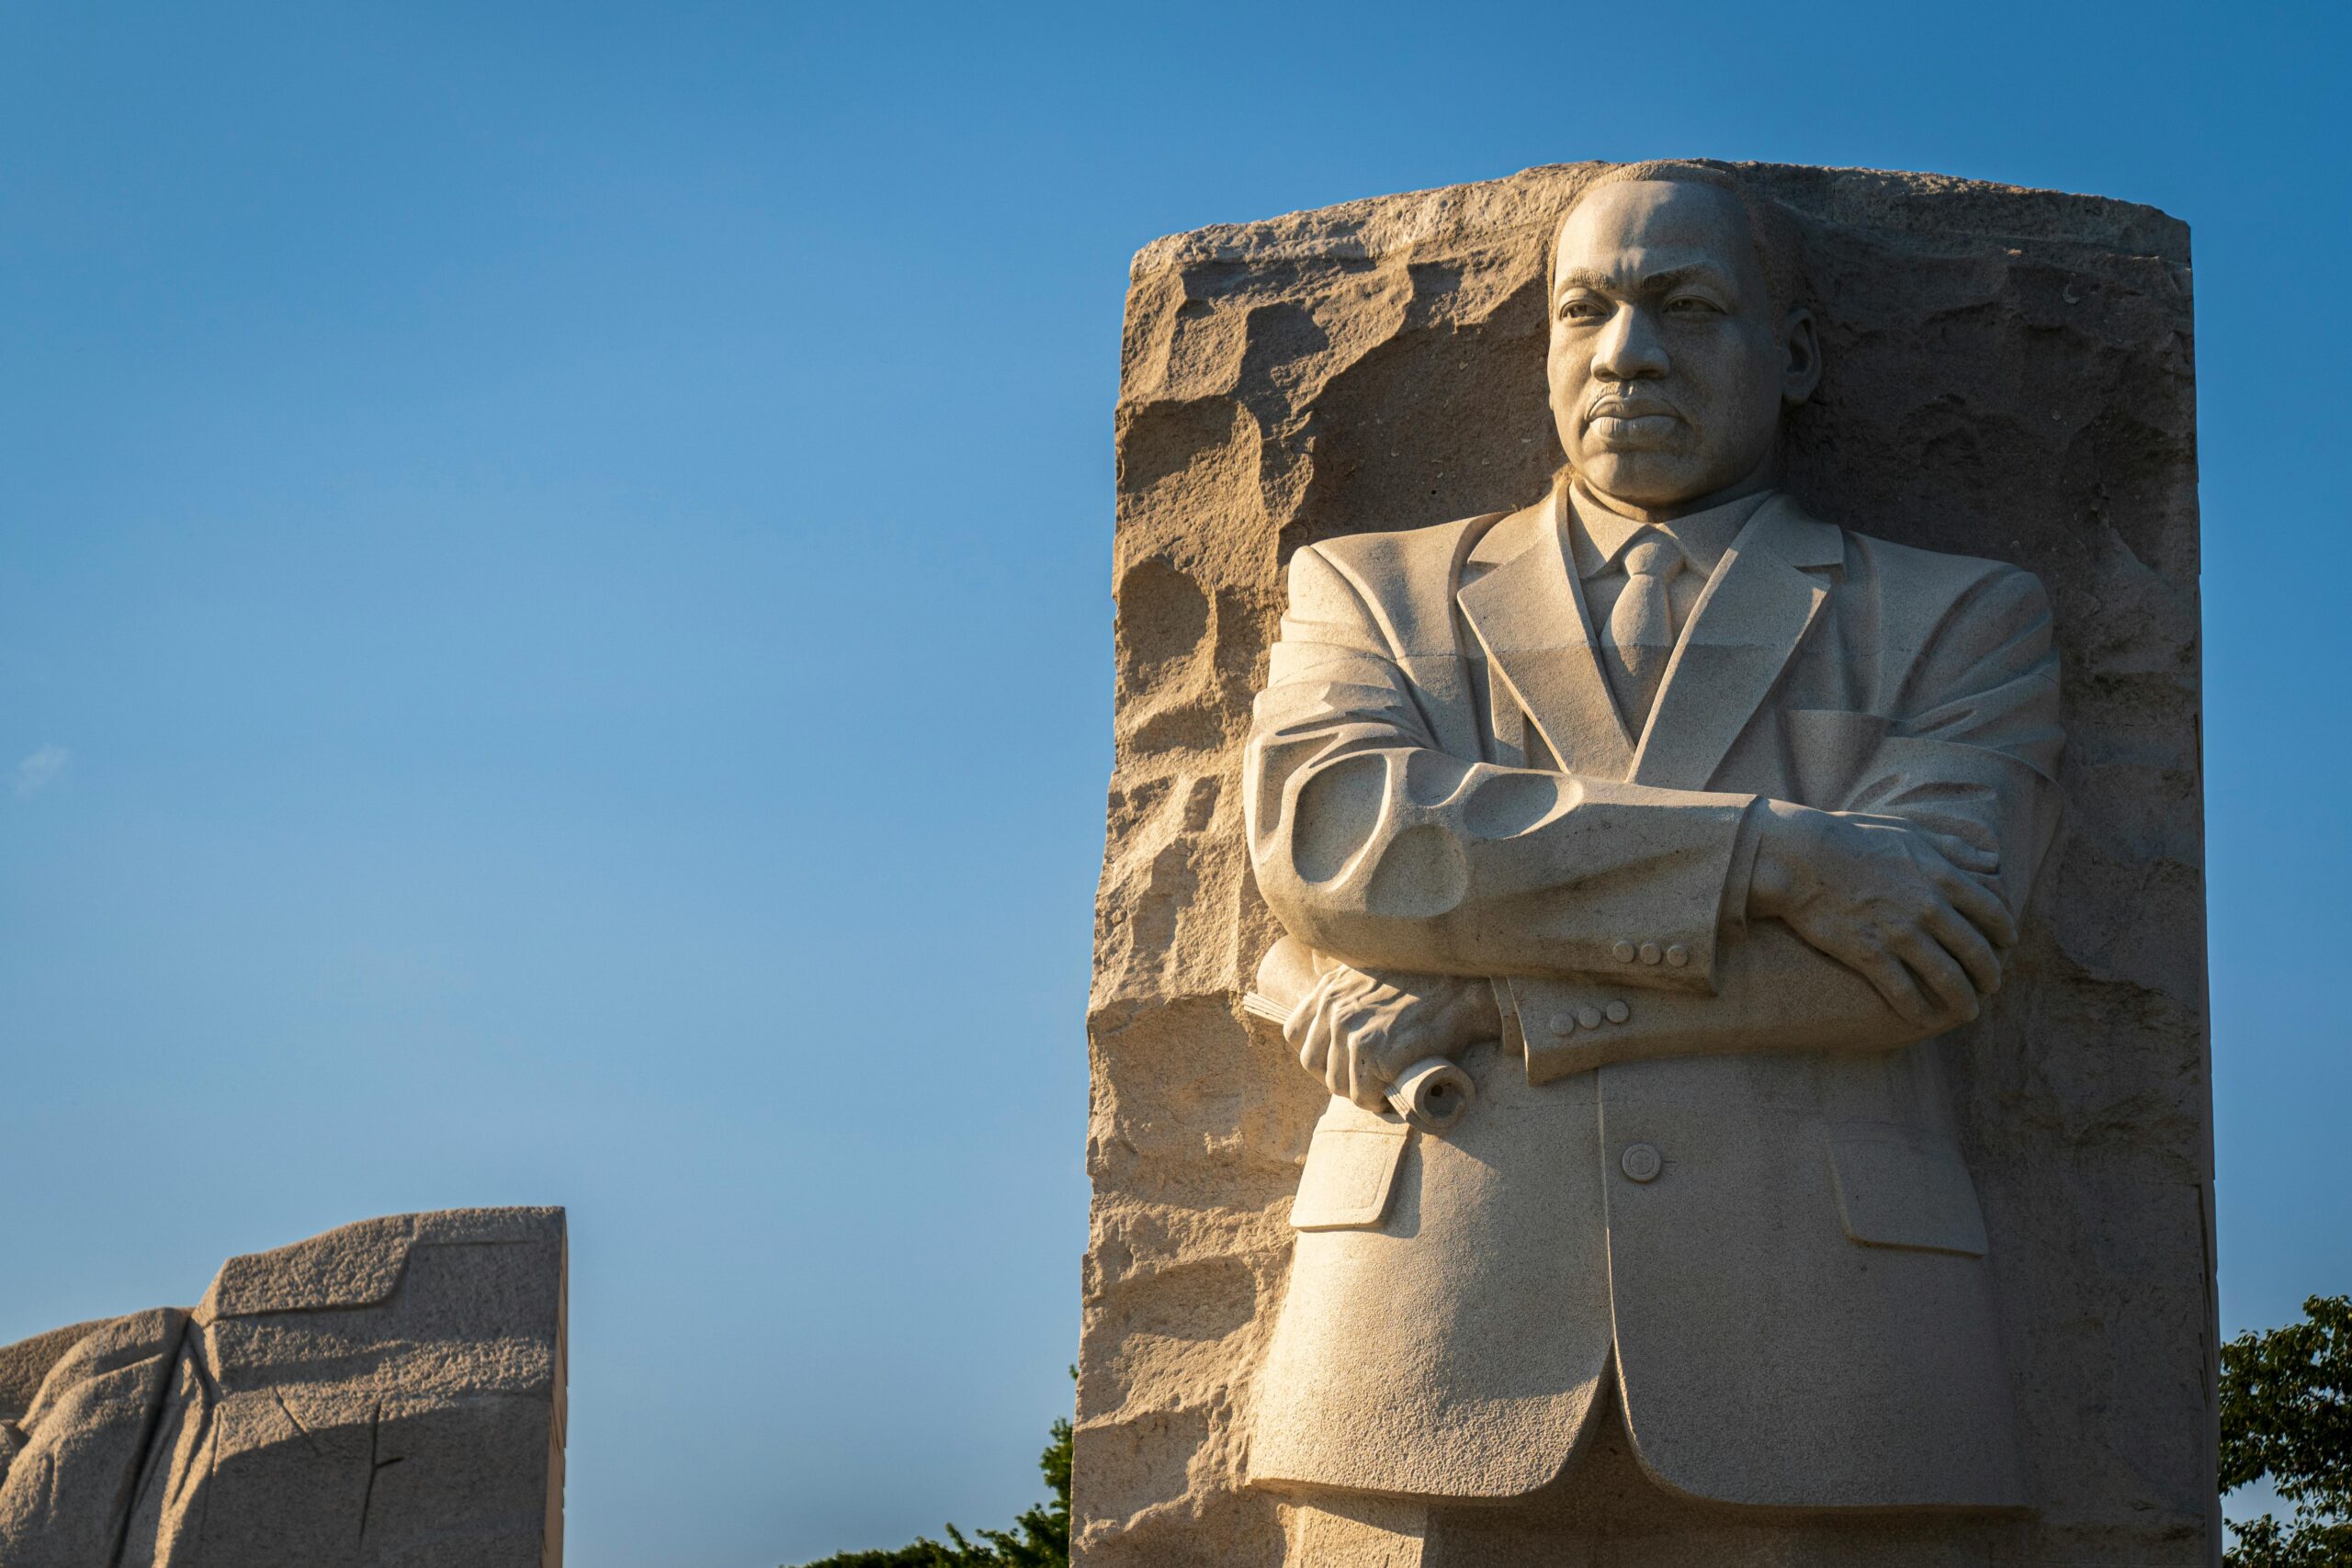 Facts About Martin Luther King Jr.